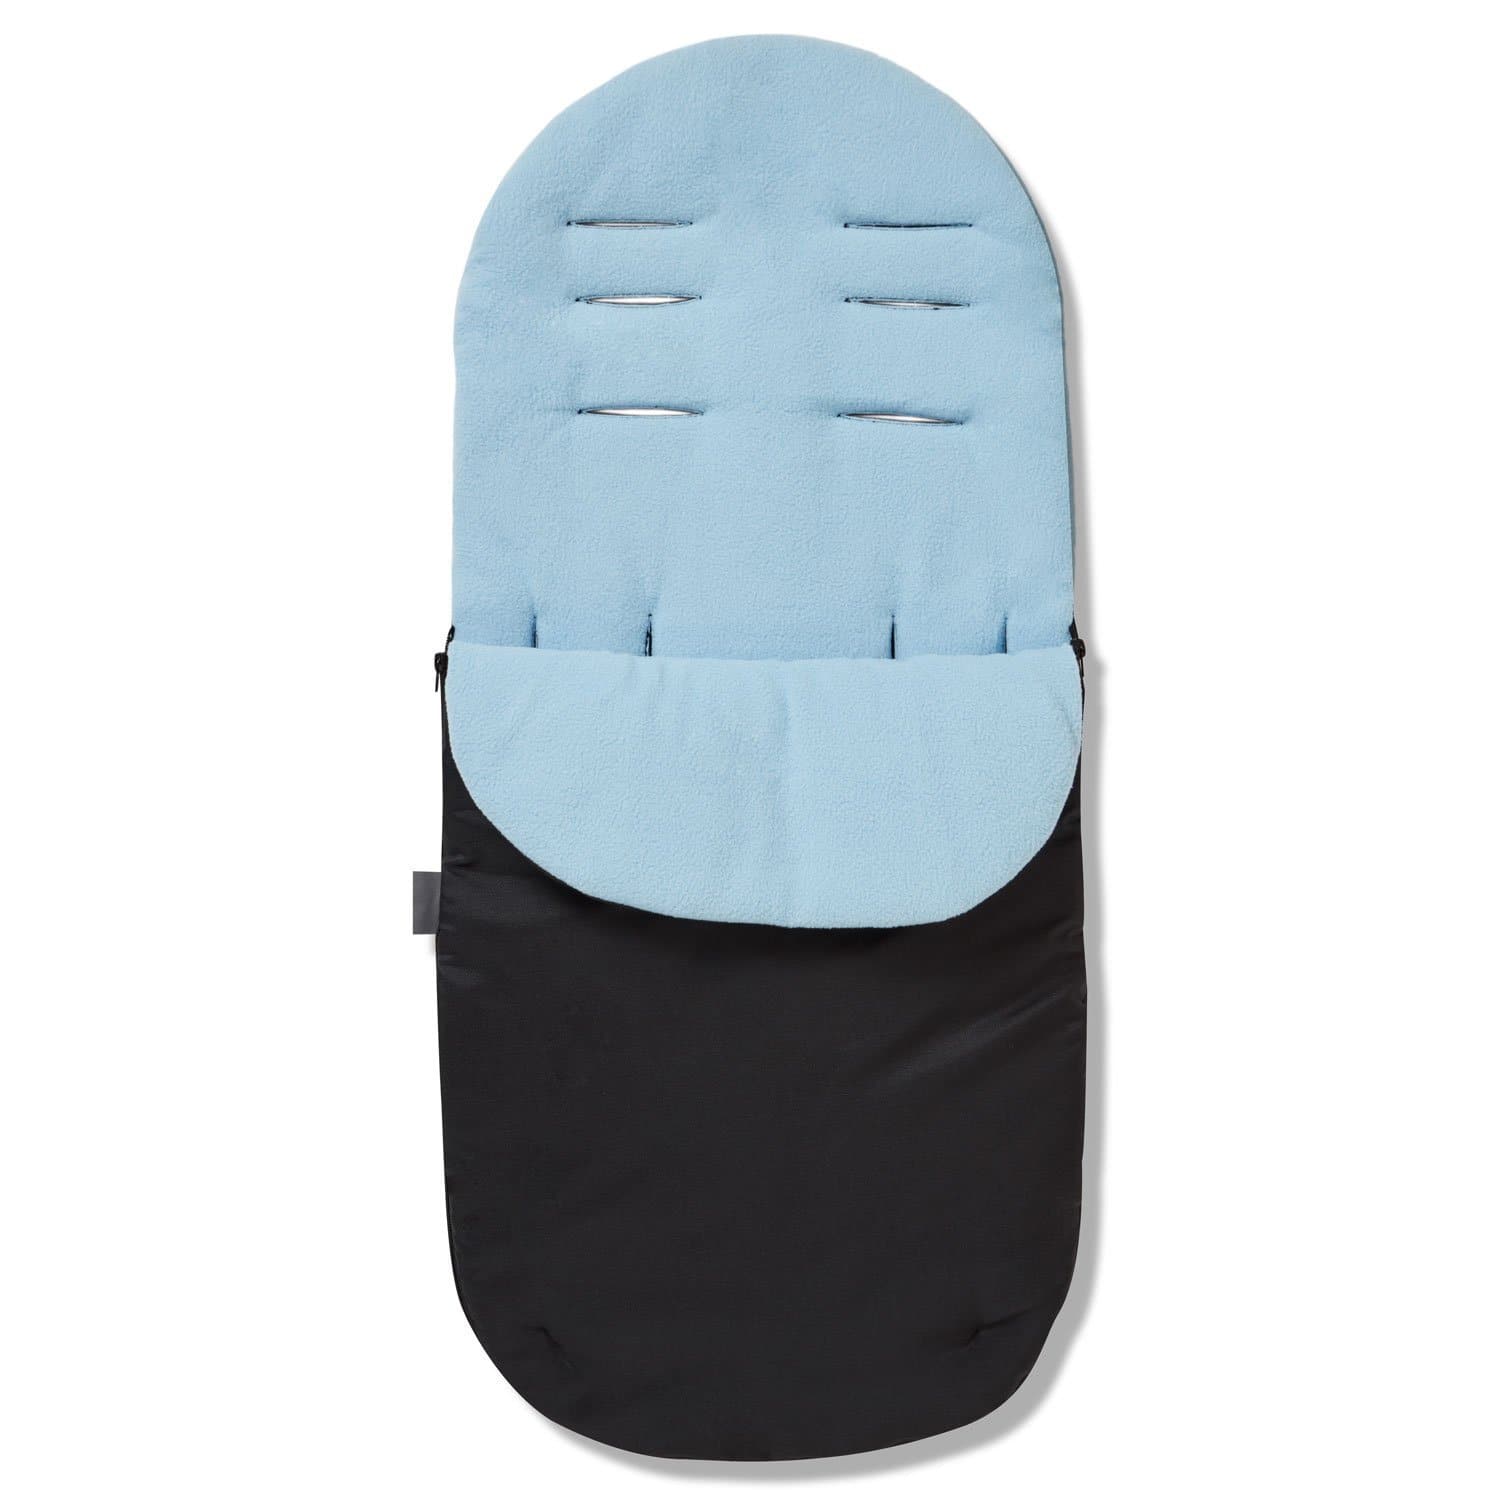 Footmuff / Cosy Toes Compatible with Cosatto - For Your Little One